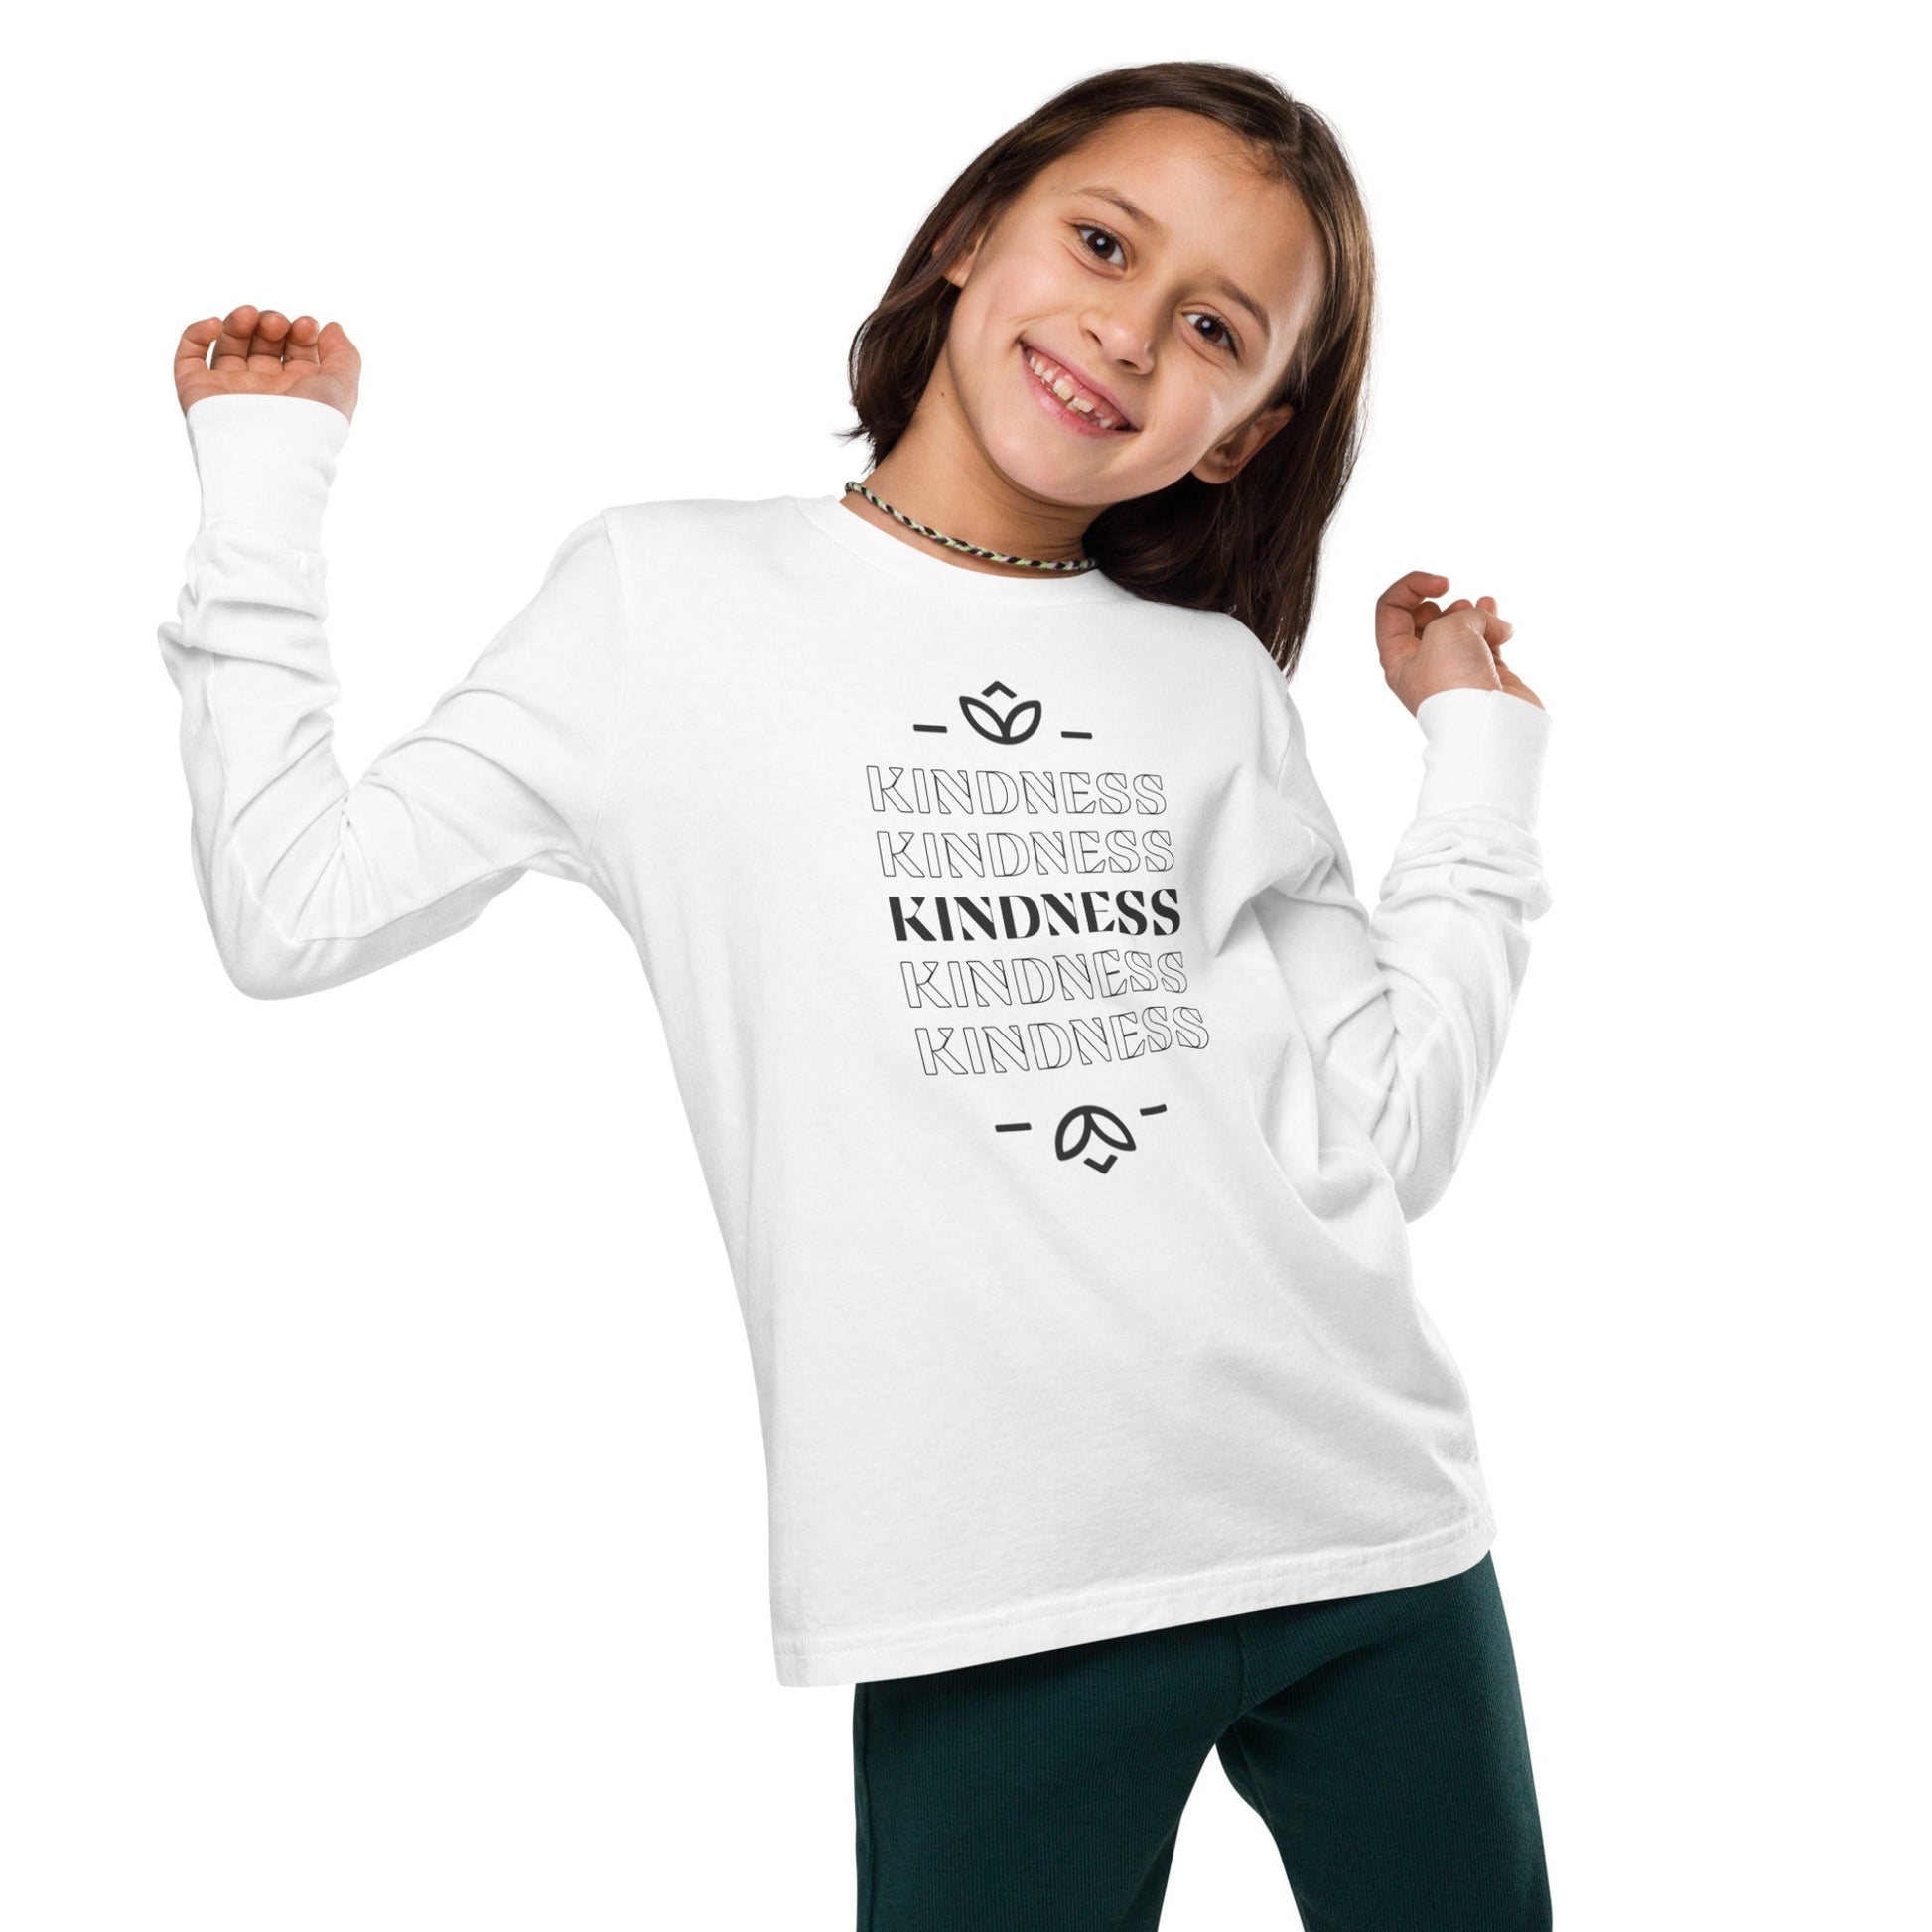 Youth sized white long sleeve shirt with "kidness" x5 written in black print. 